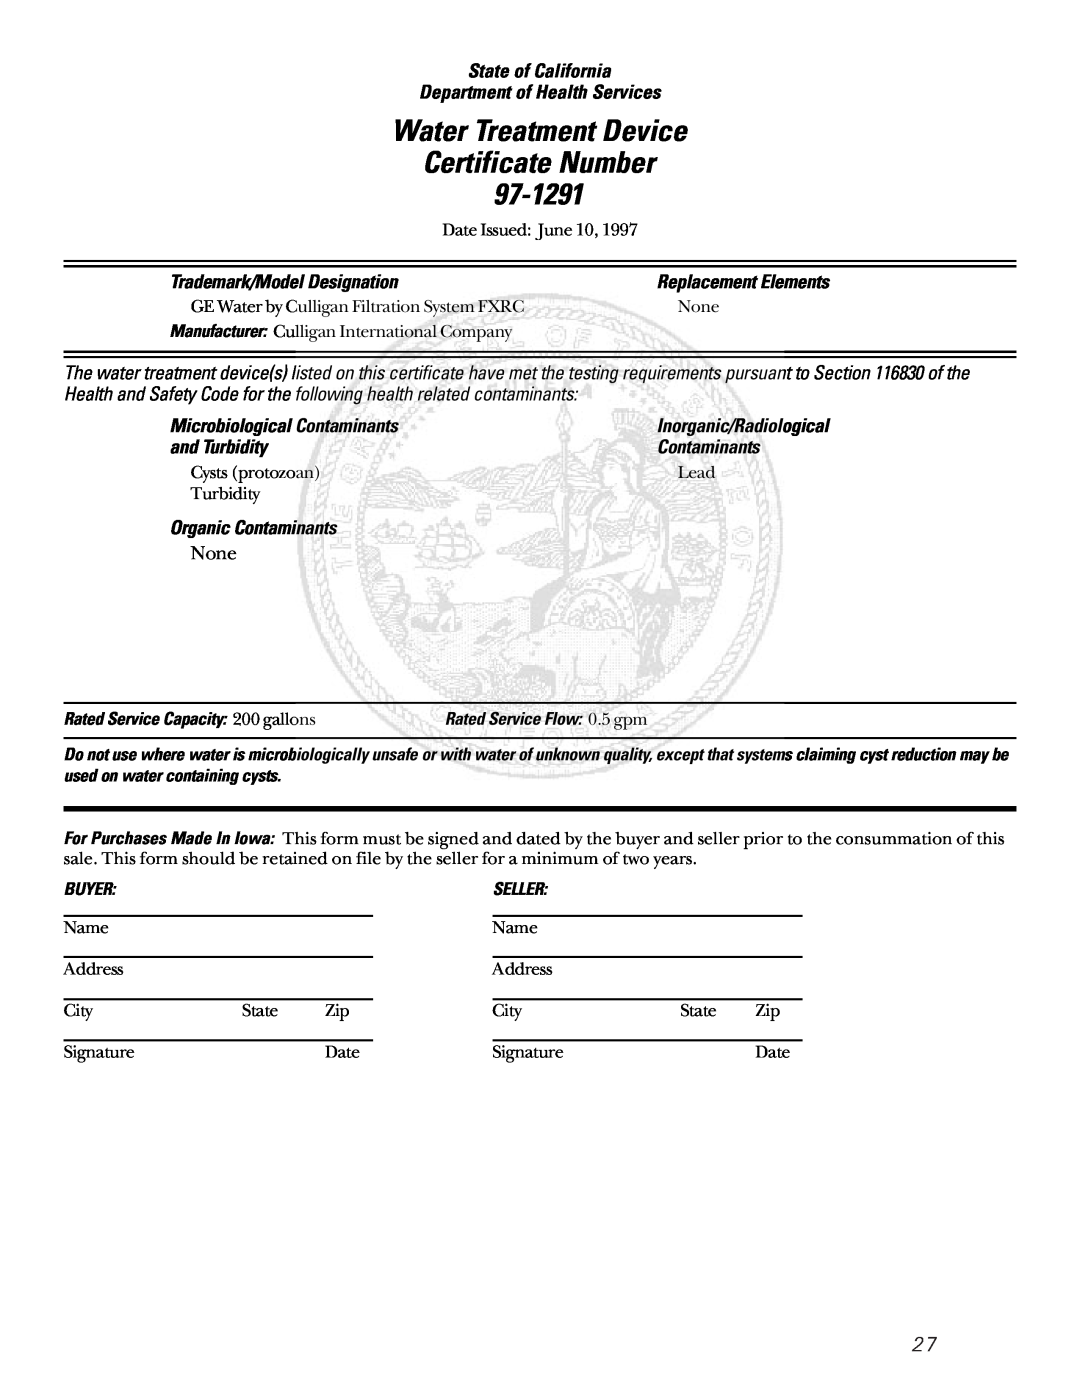 GE 22-27 Water Treatment Device Certificate Number 97-1291, State of California Department of Health Services, None, Lead 